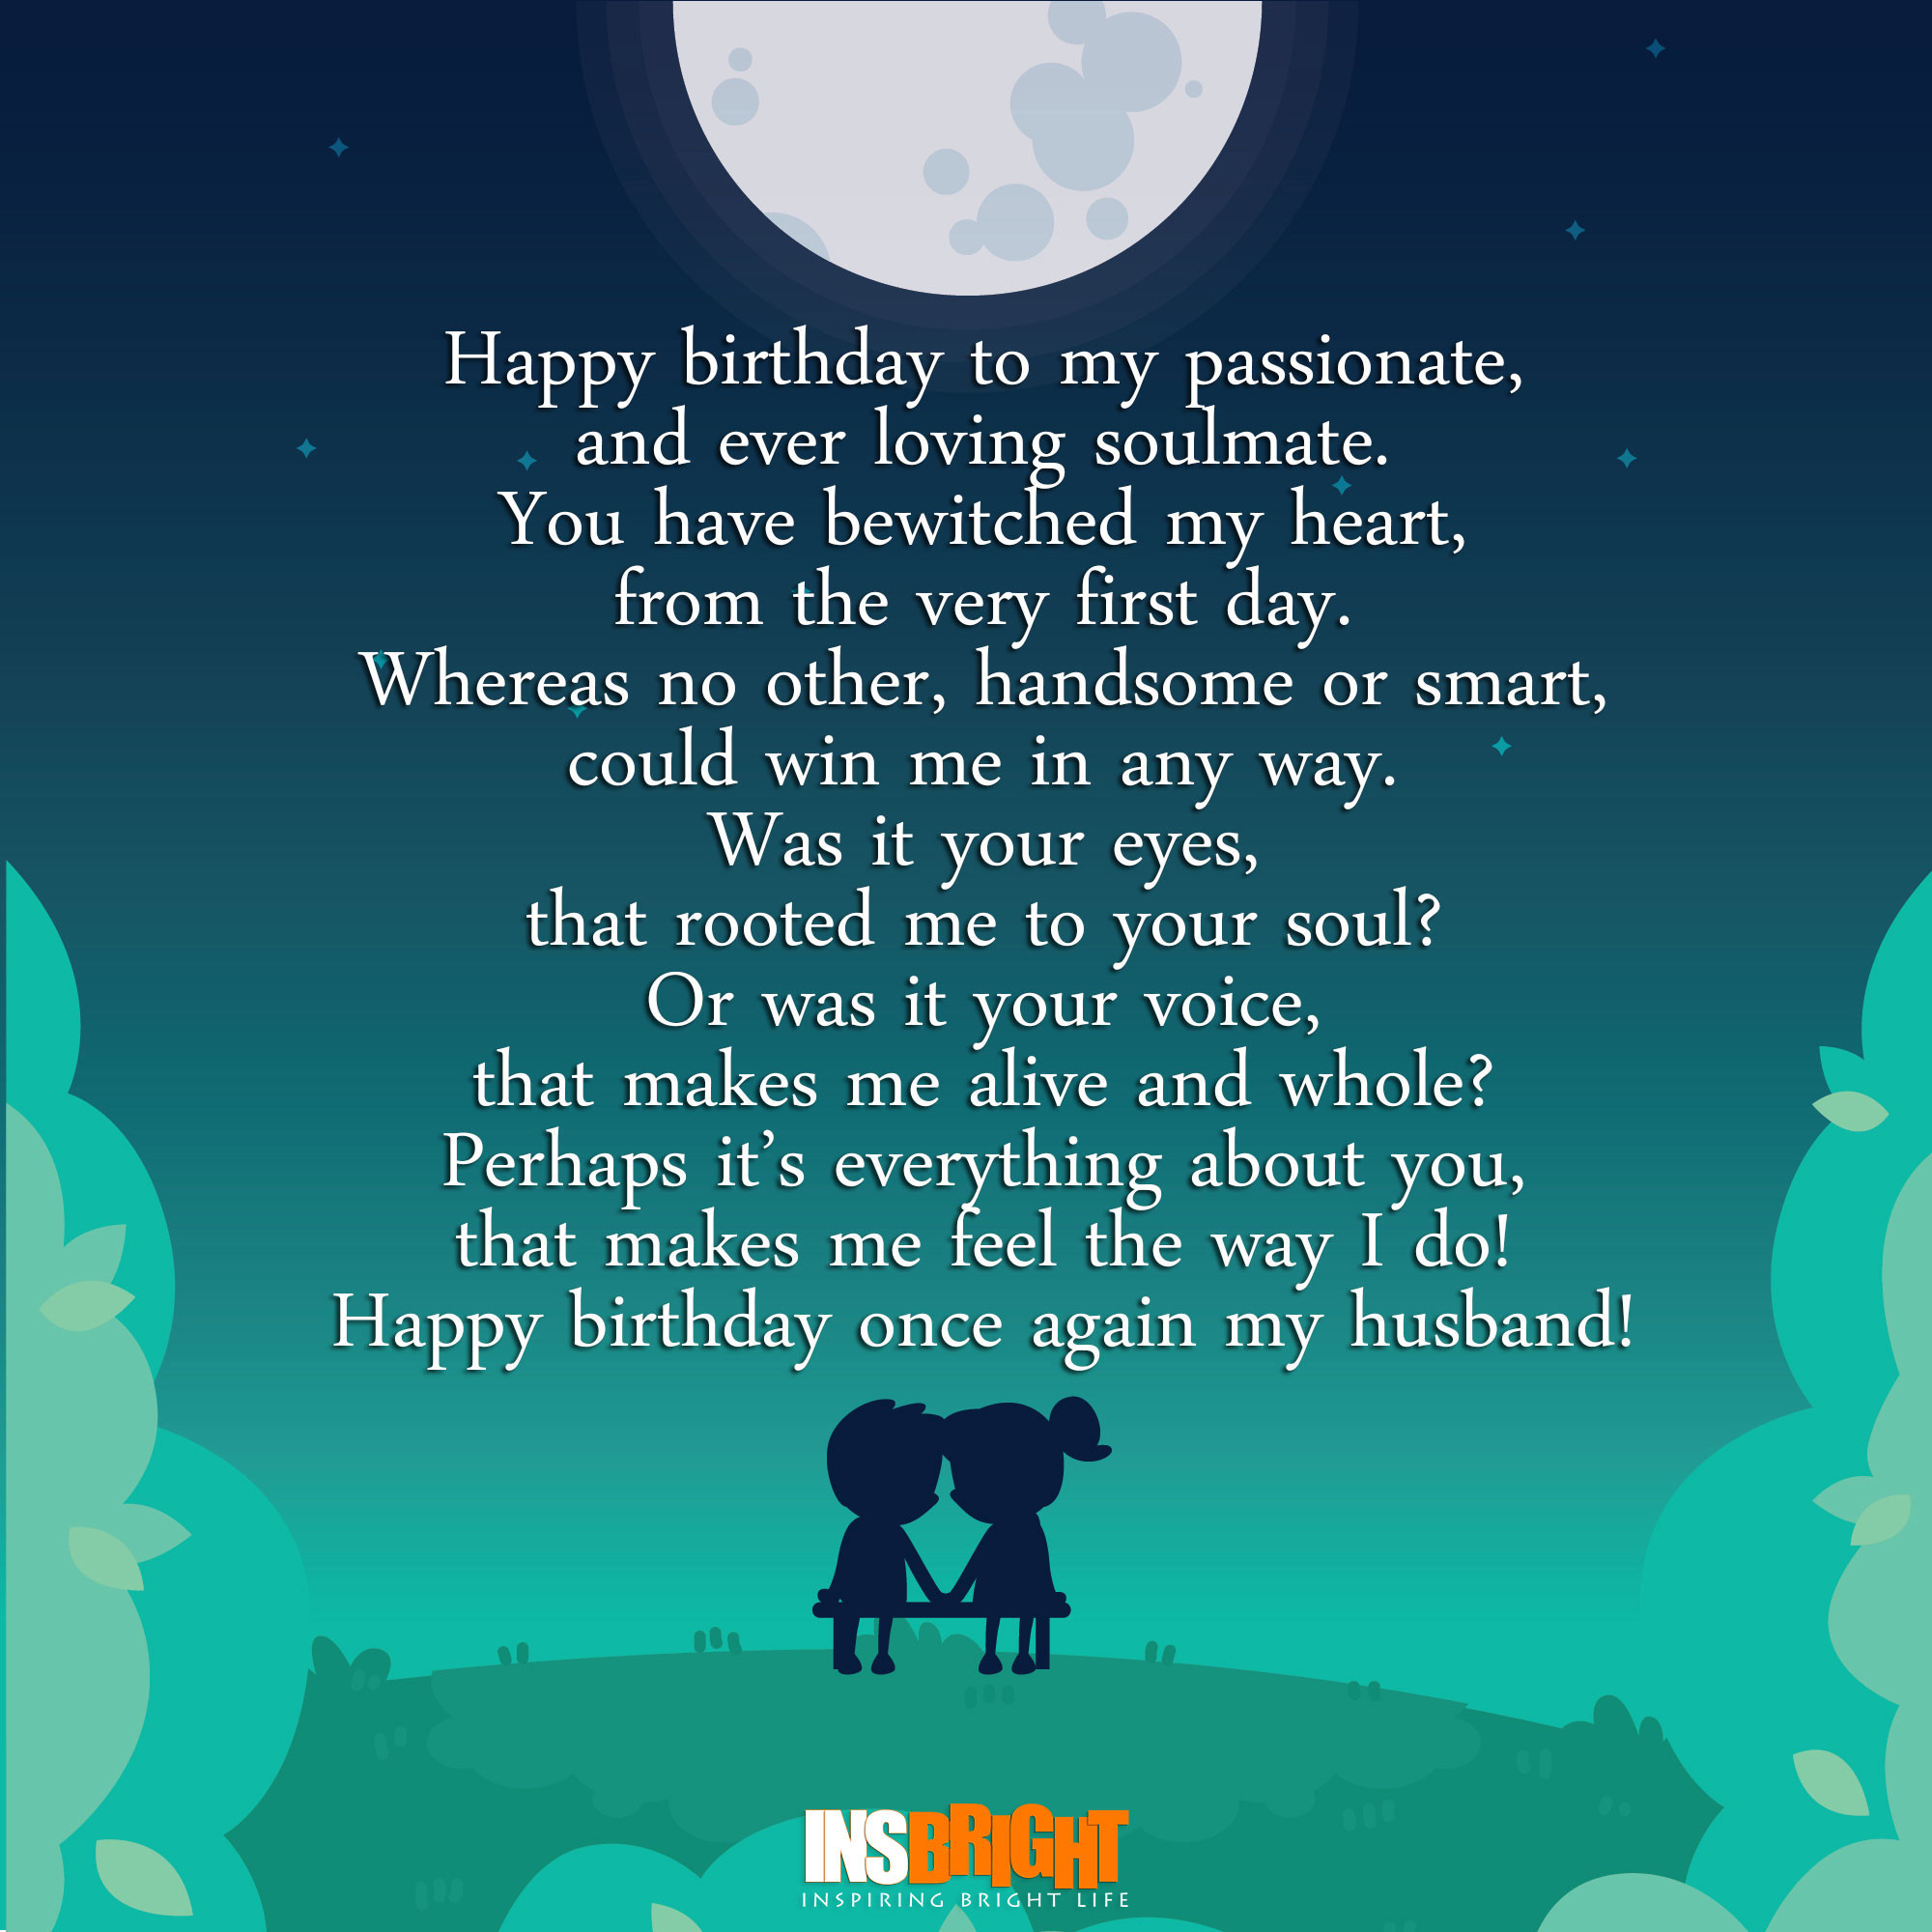 Happy Birthday Quotes Husband
 Romantic Happy Birthday Poems For Husband From Wife